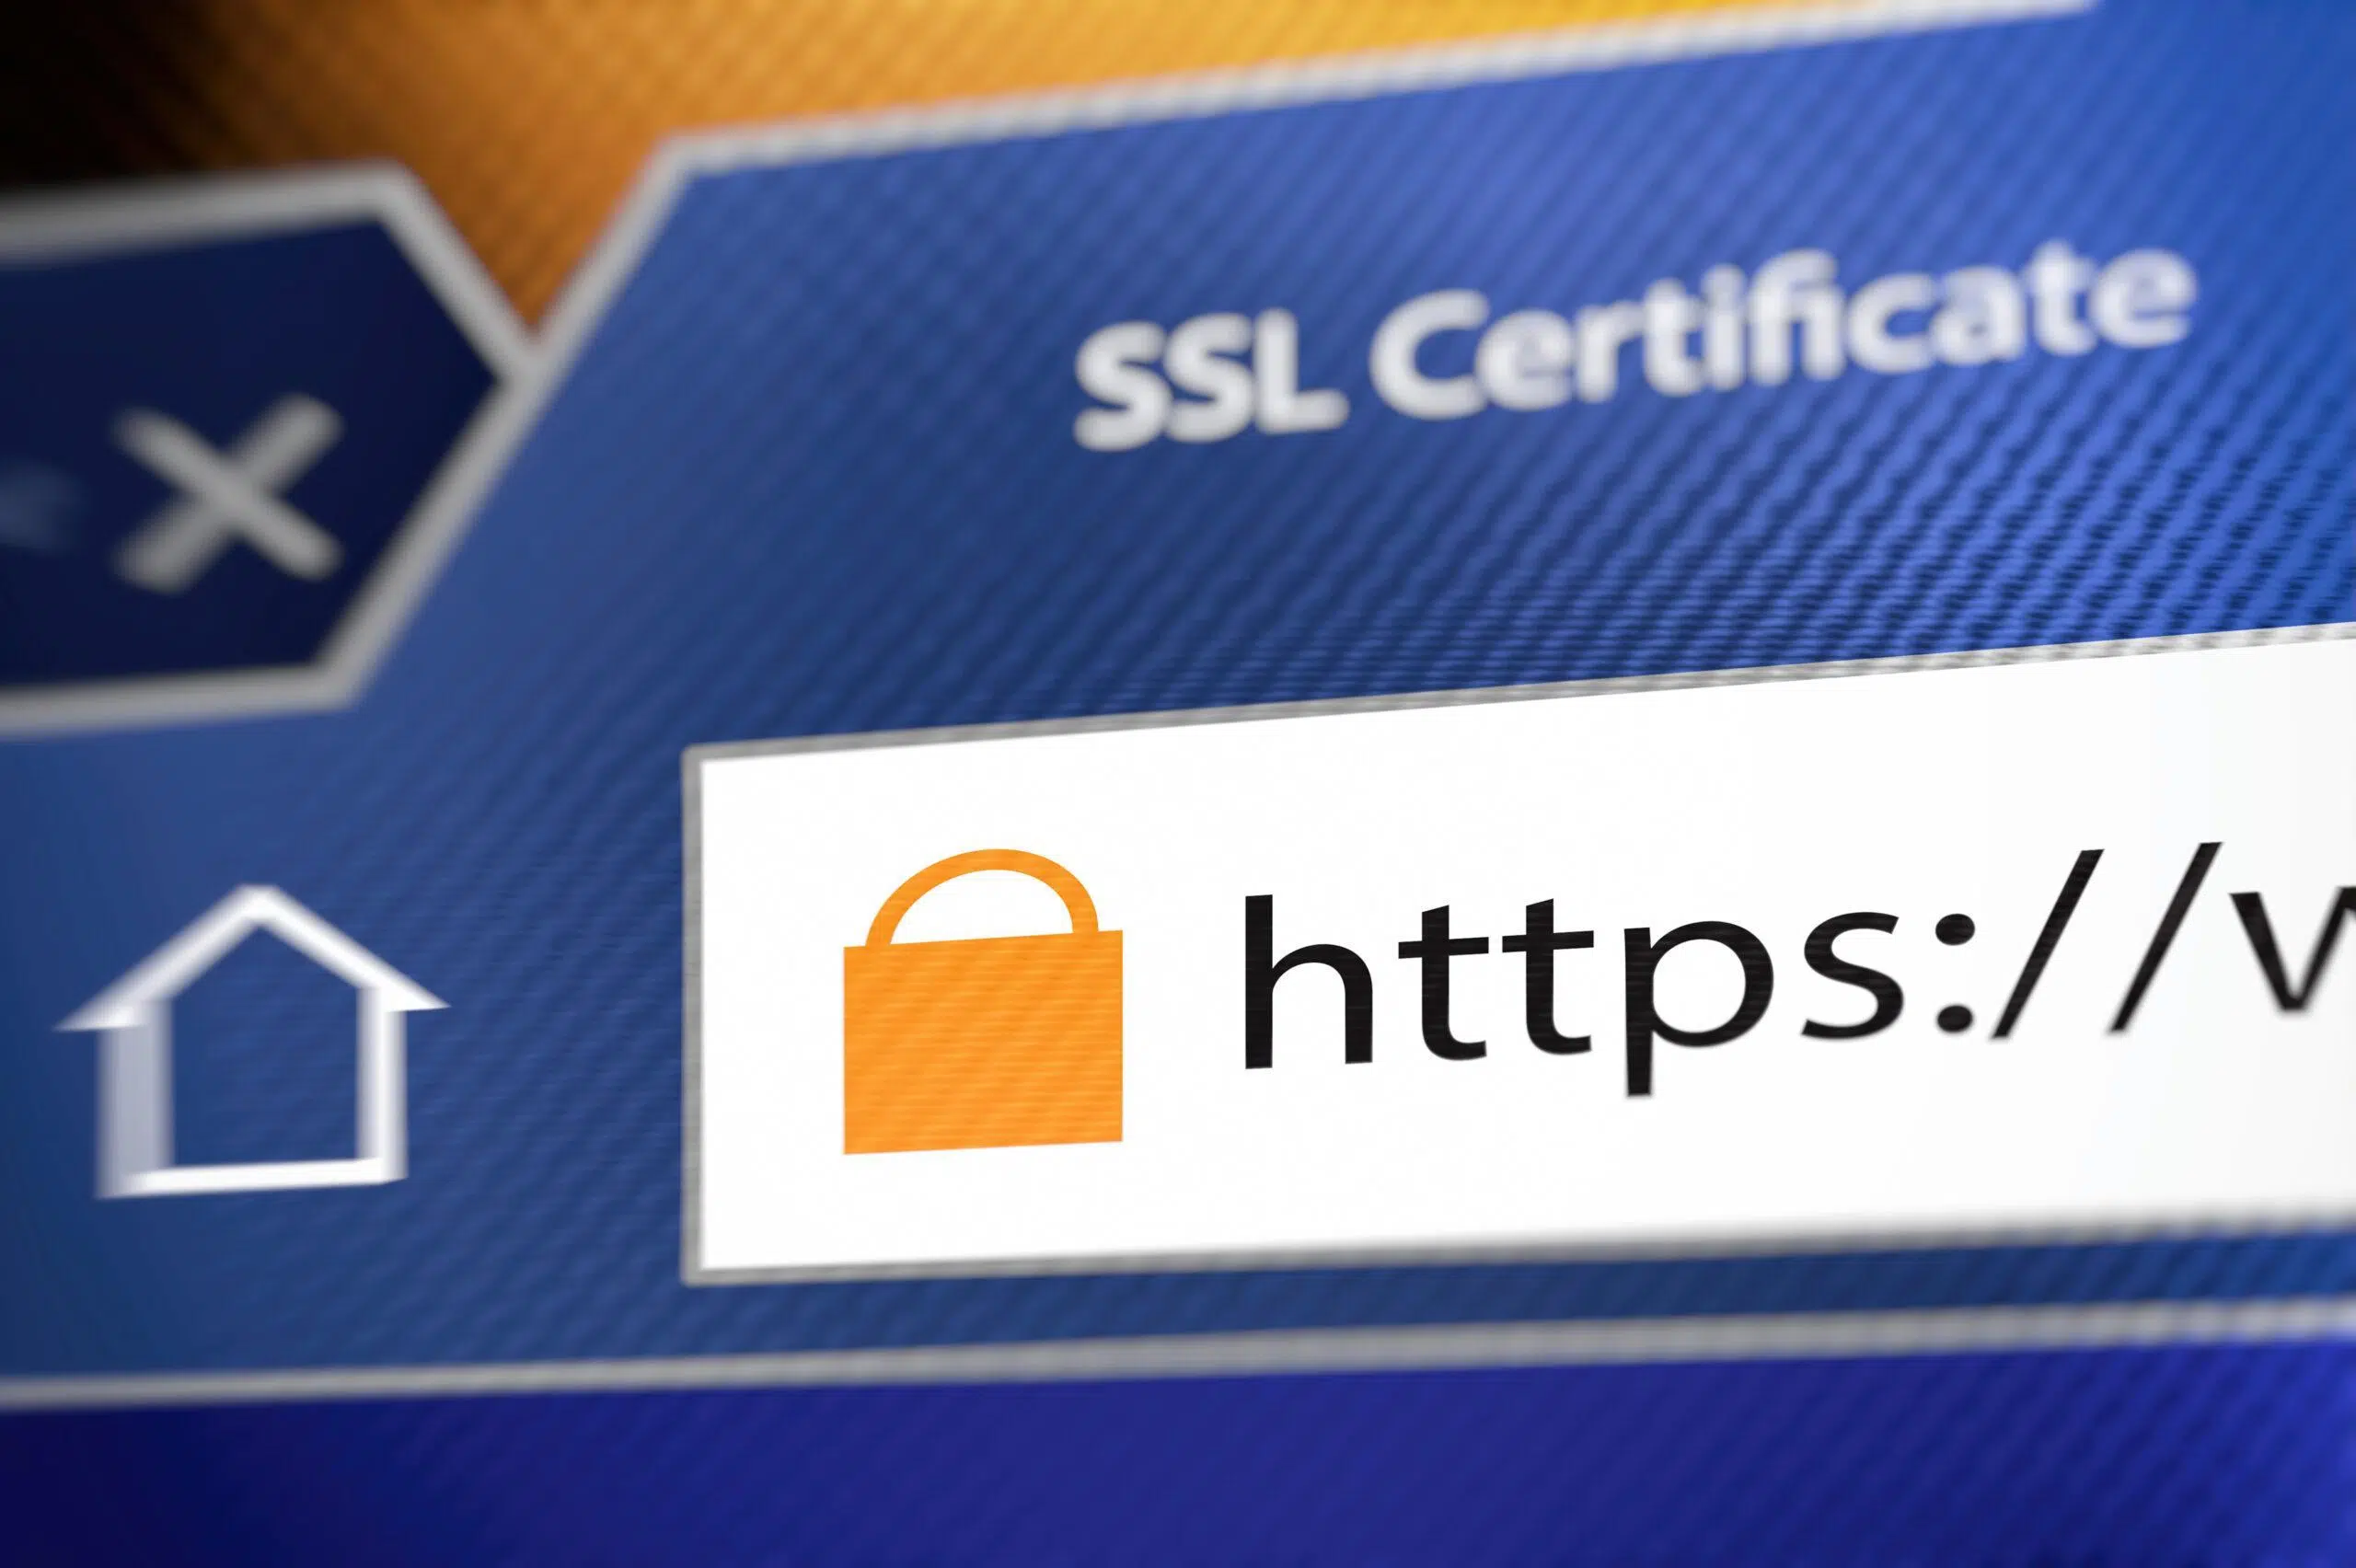 Browser window showing lock icon during SSL connection